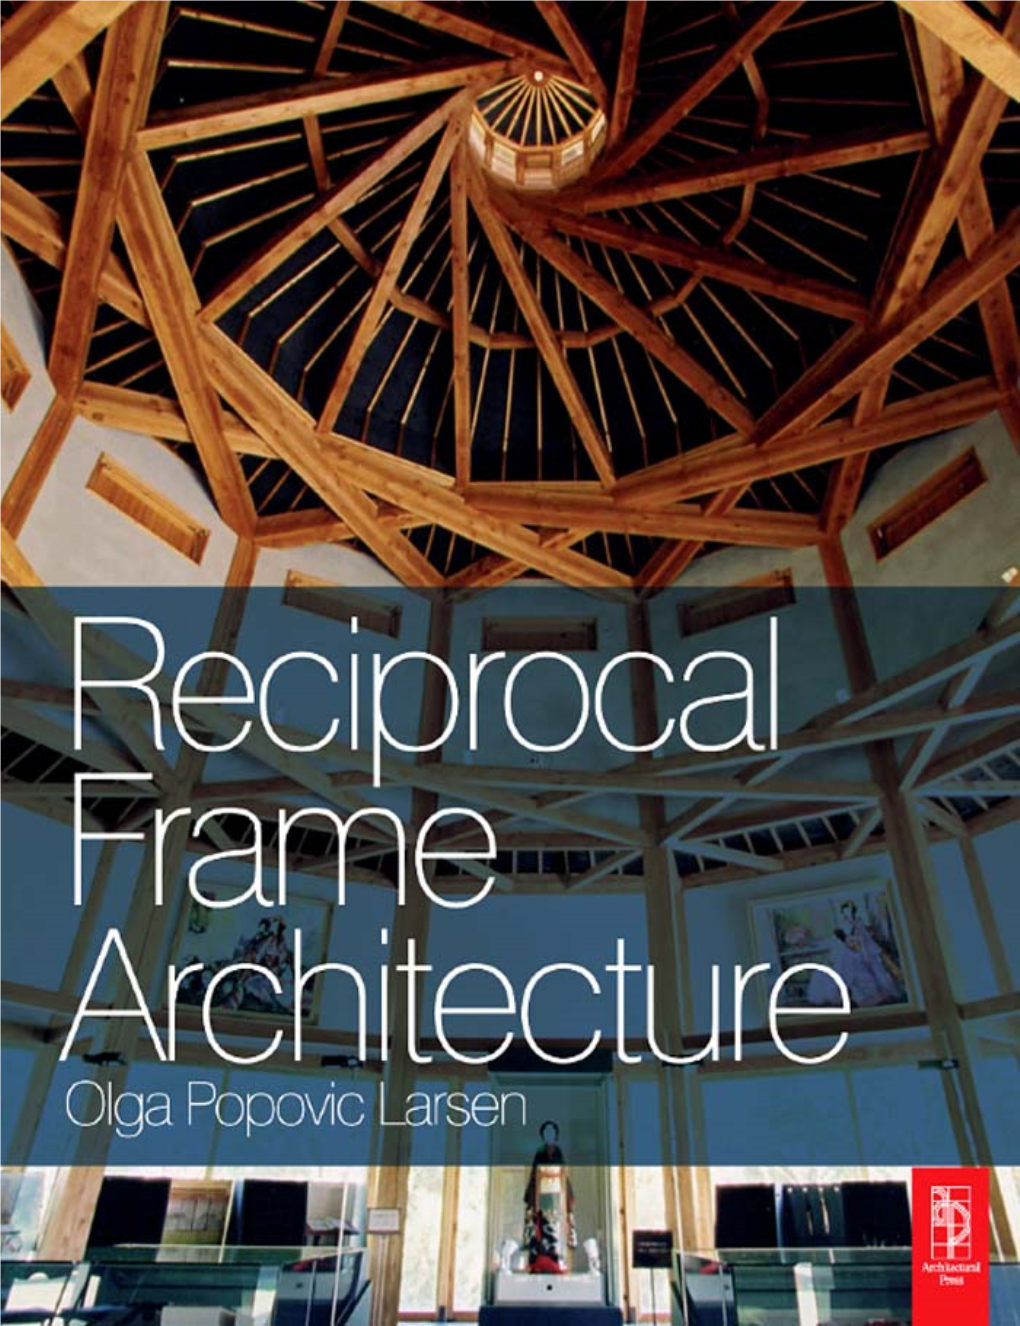 RECIPROCAL FRAME ARCHITECTURE to Jens and Sofia RECIPROCAL FRAME ARCHITECTURE